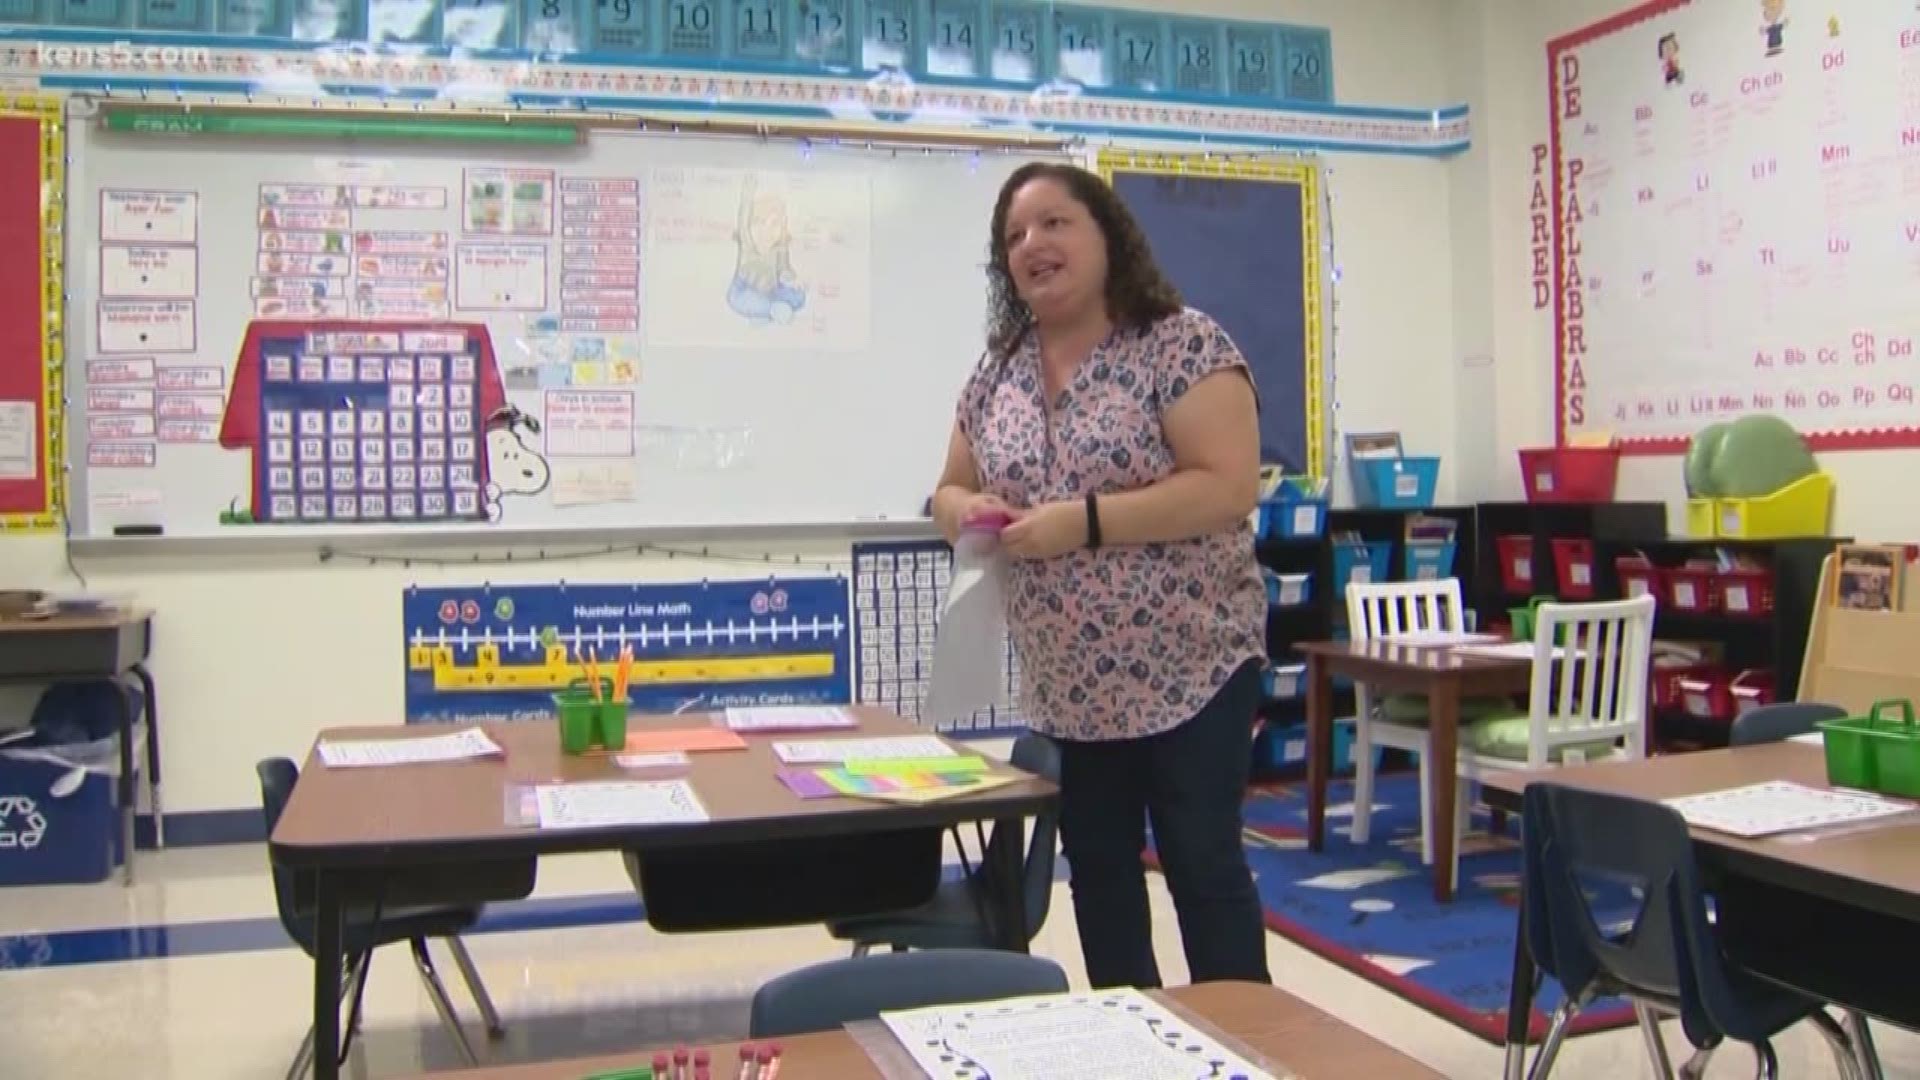 Along with a pay raise, teachers in Seguin ISD are getting an extra $200 to put toward their classroom.